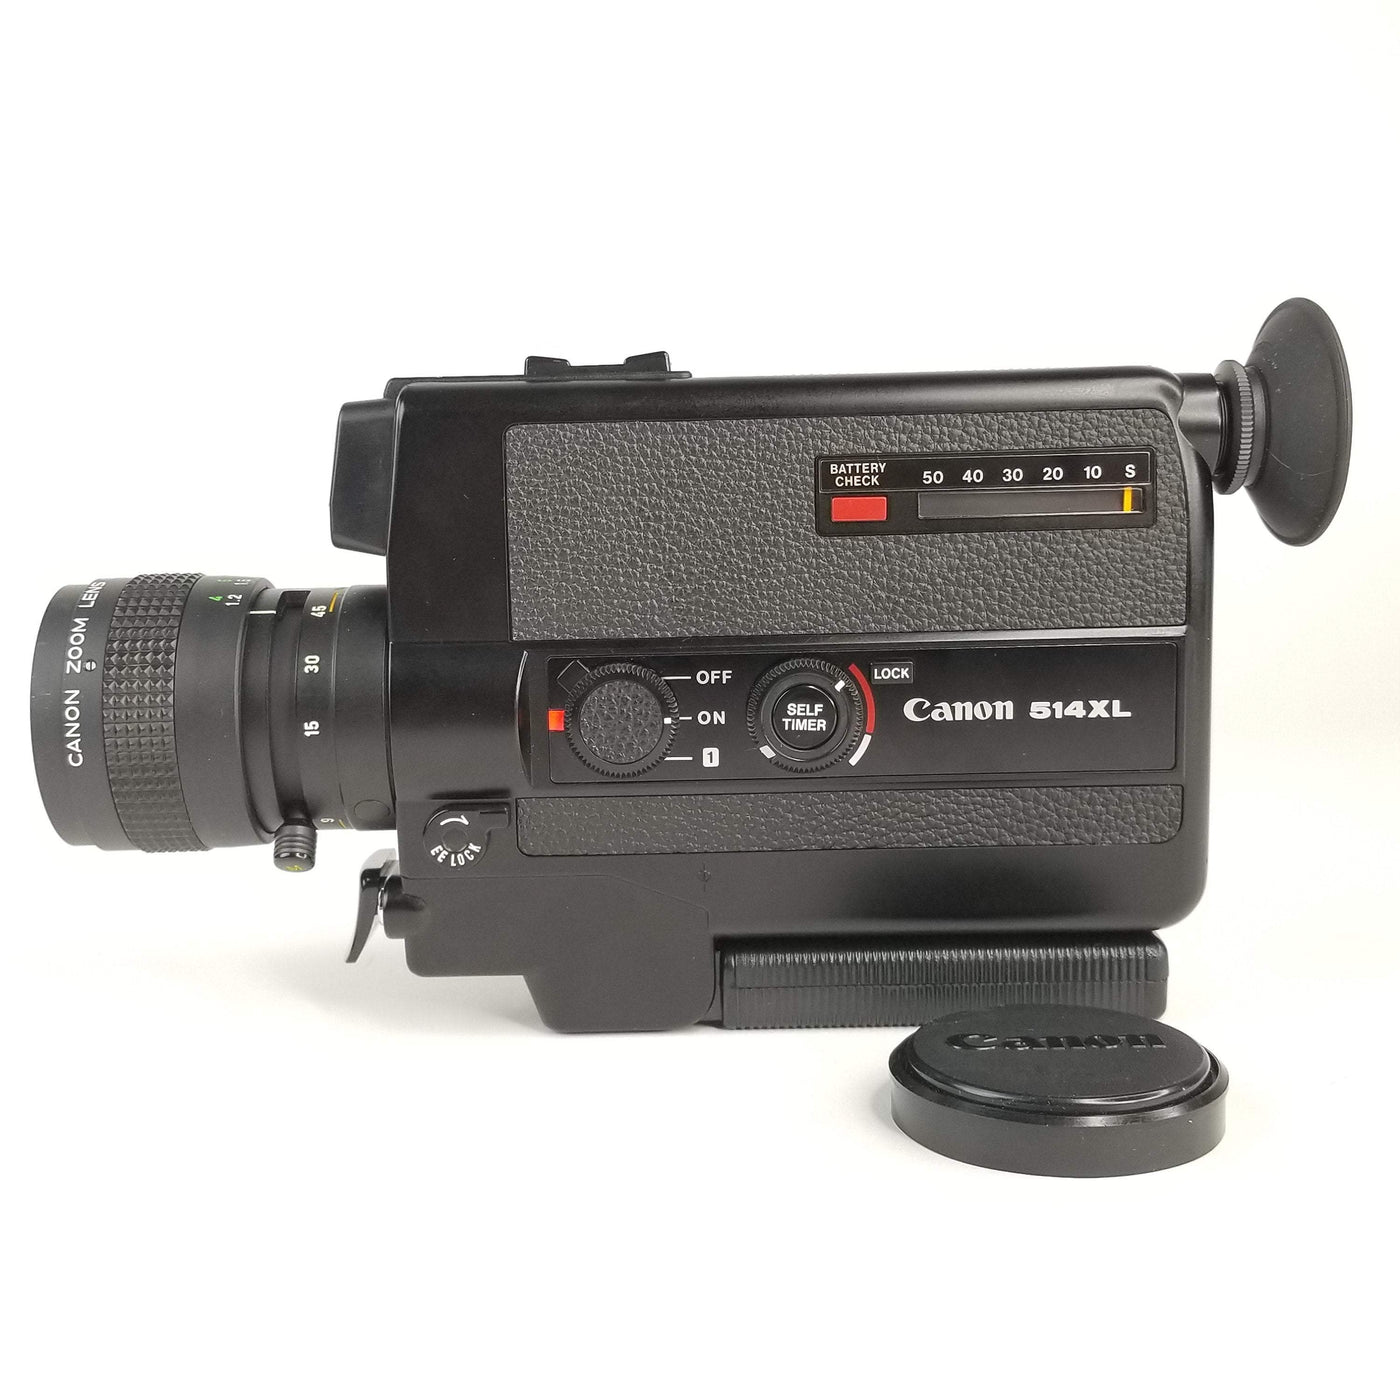 Canon 514XL Super 8 Camera - ULTIMATE SET Professionally Serviced and Fully Tested Super 8 Cameras Canon 